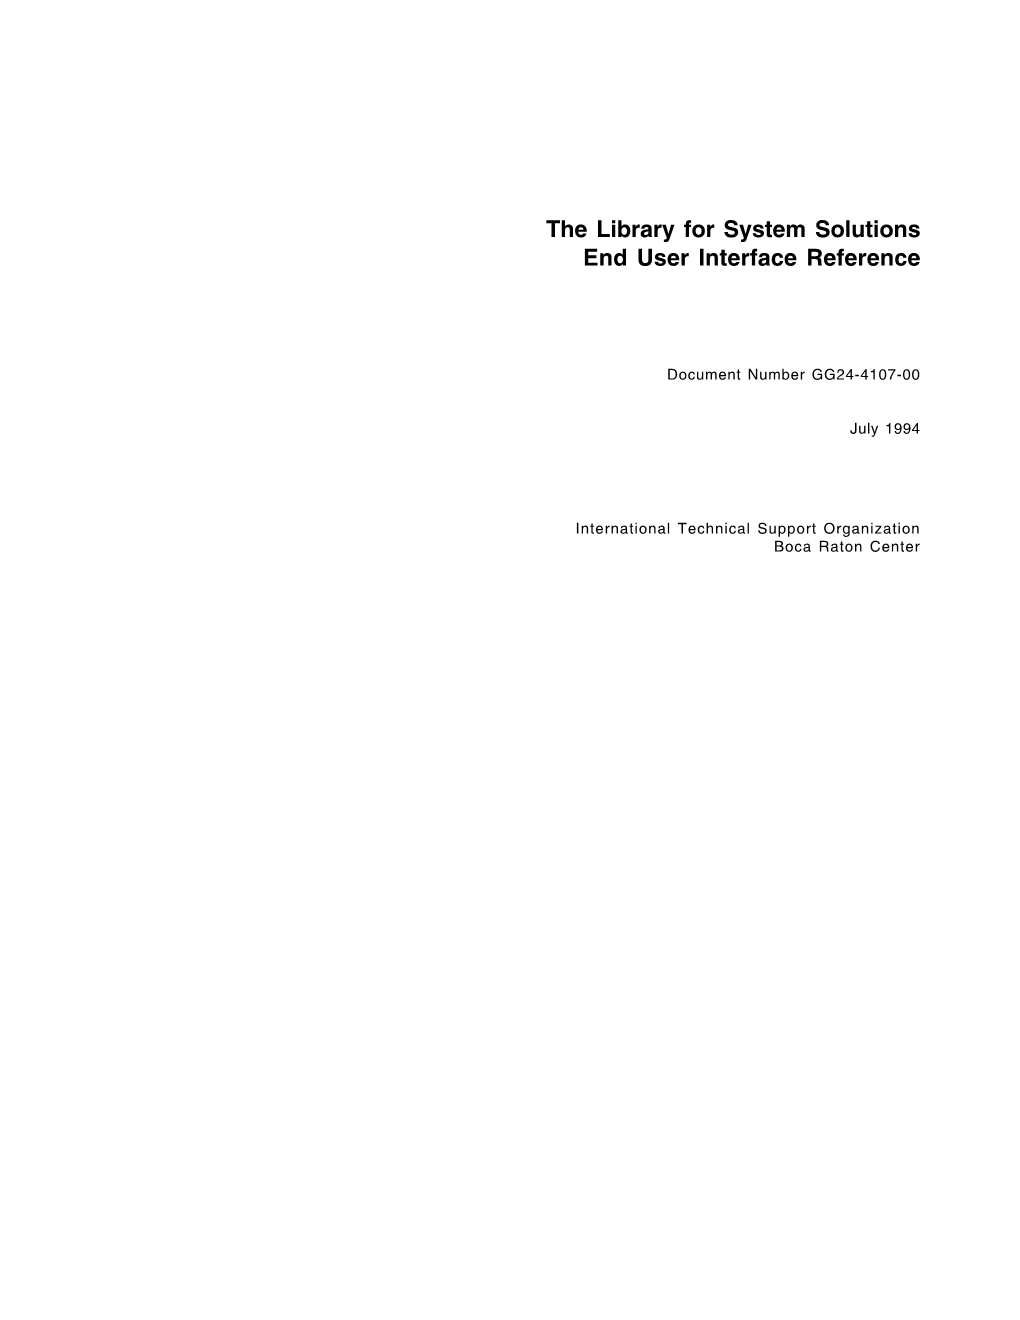 The Library for System Solutions End User Interface Reference